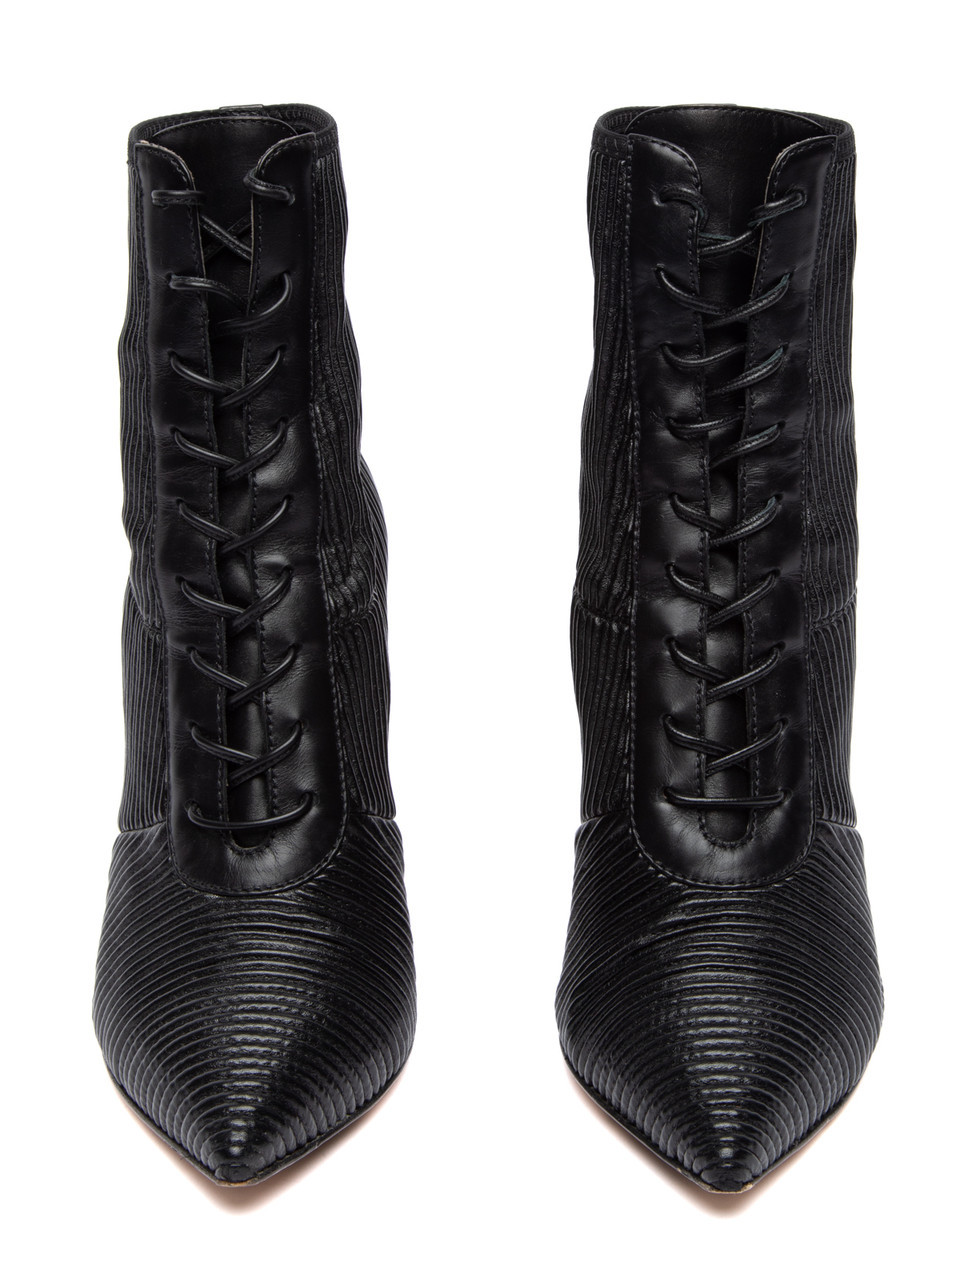 Gianvito Rossi, Lace up Ankle Boots, Black, Leather